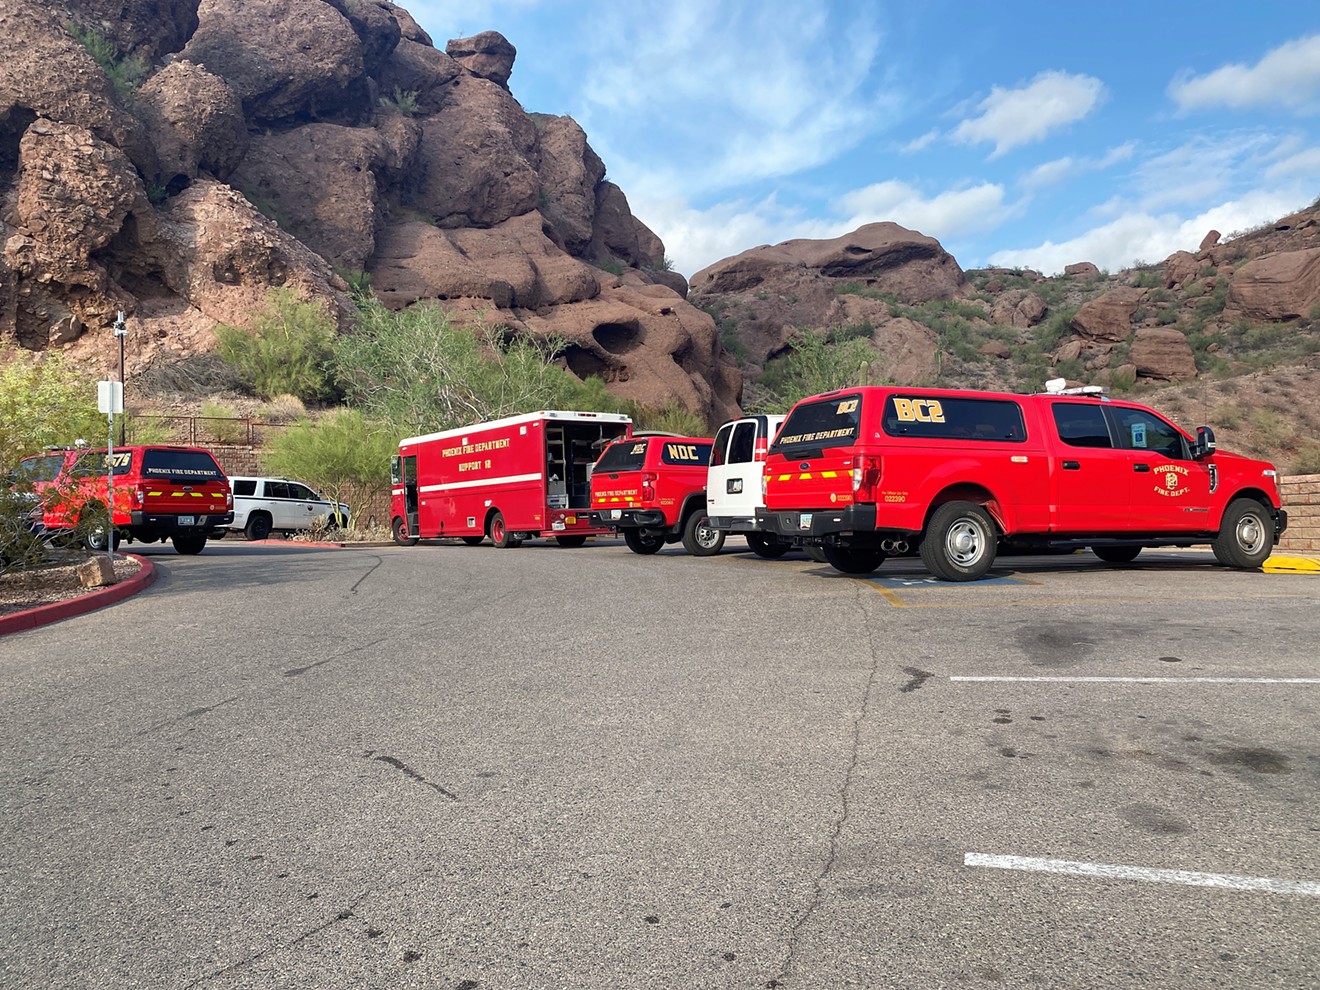 Another day, another rescue on Camelback Mountain.